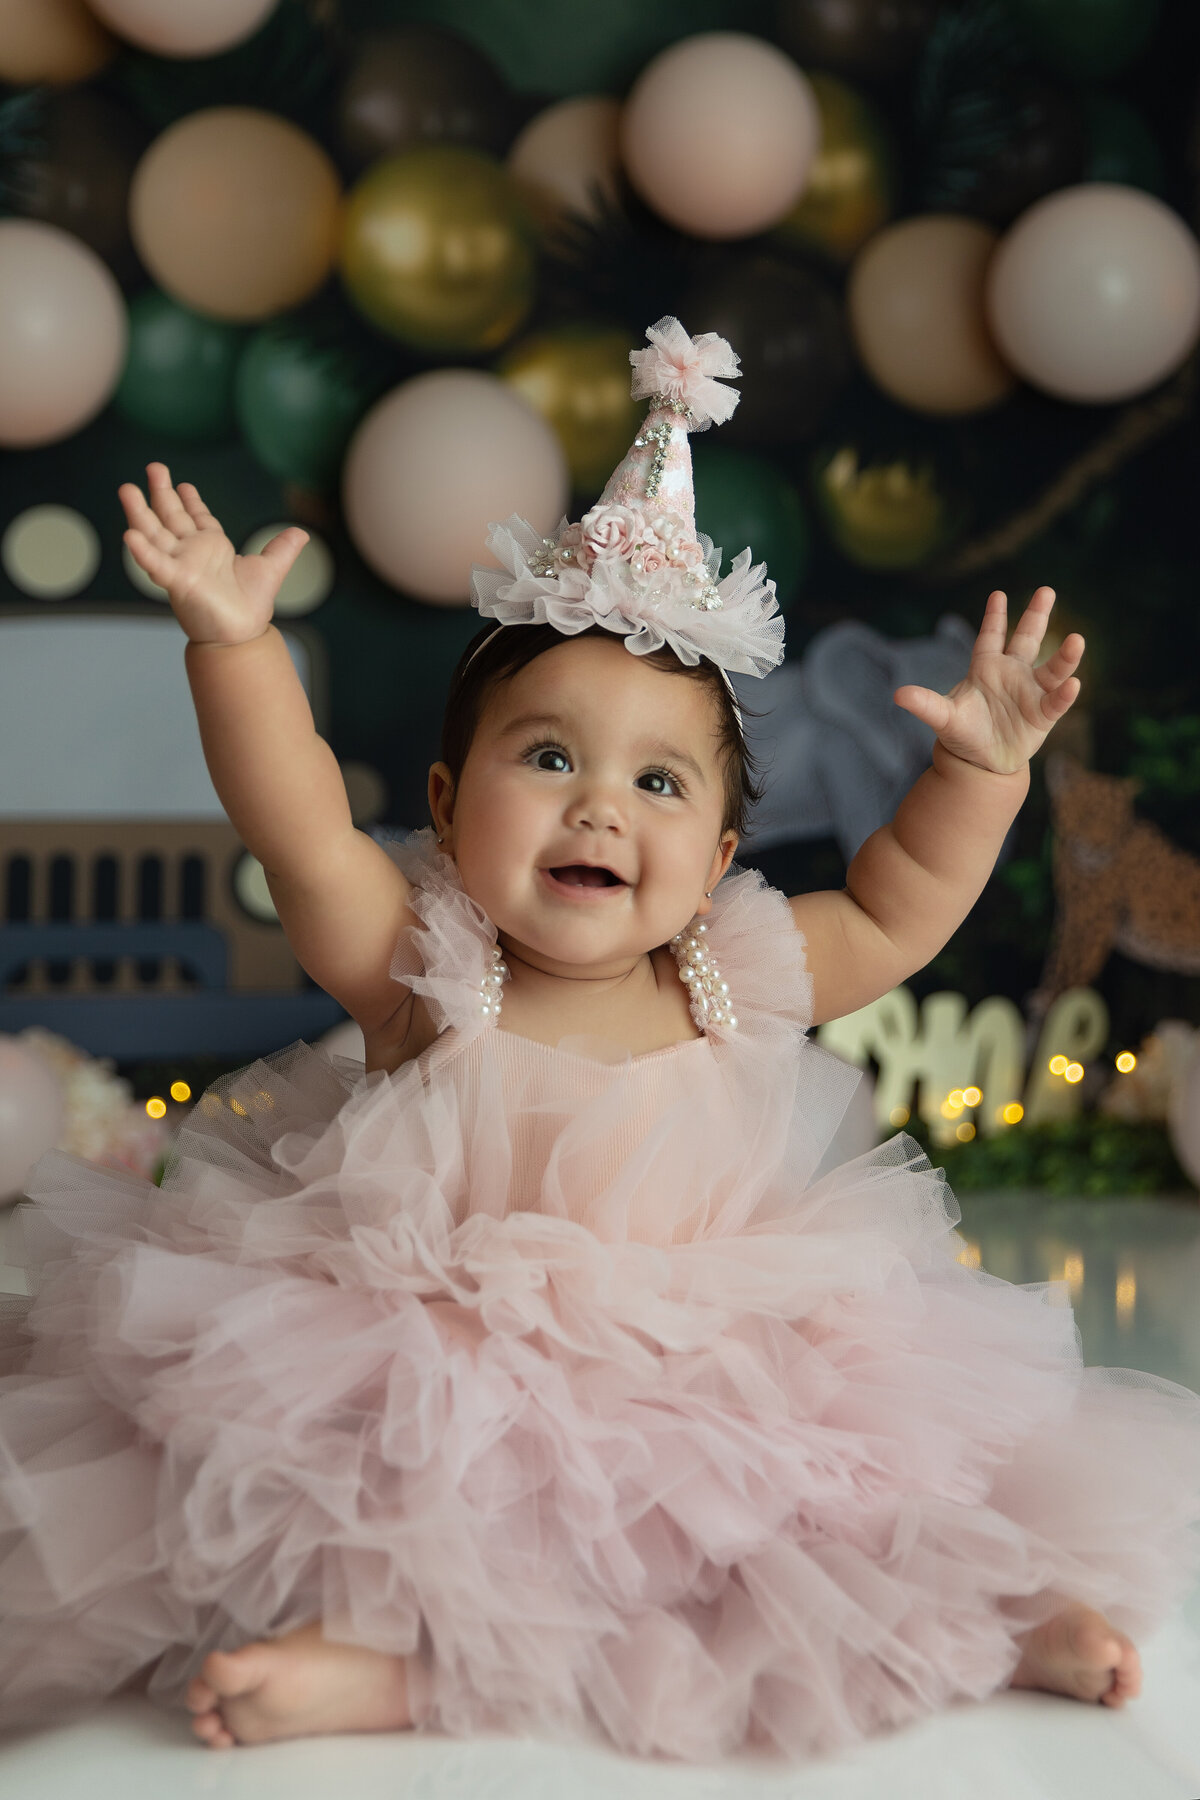 A happy baby girl throws her hands in the air while wearing a pink dress and matching birthday hat